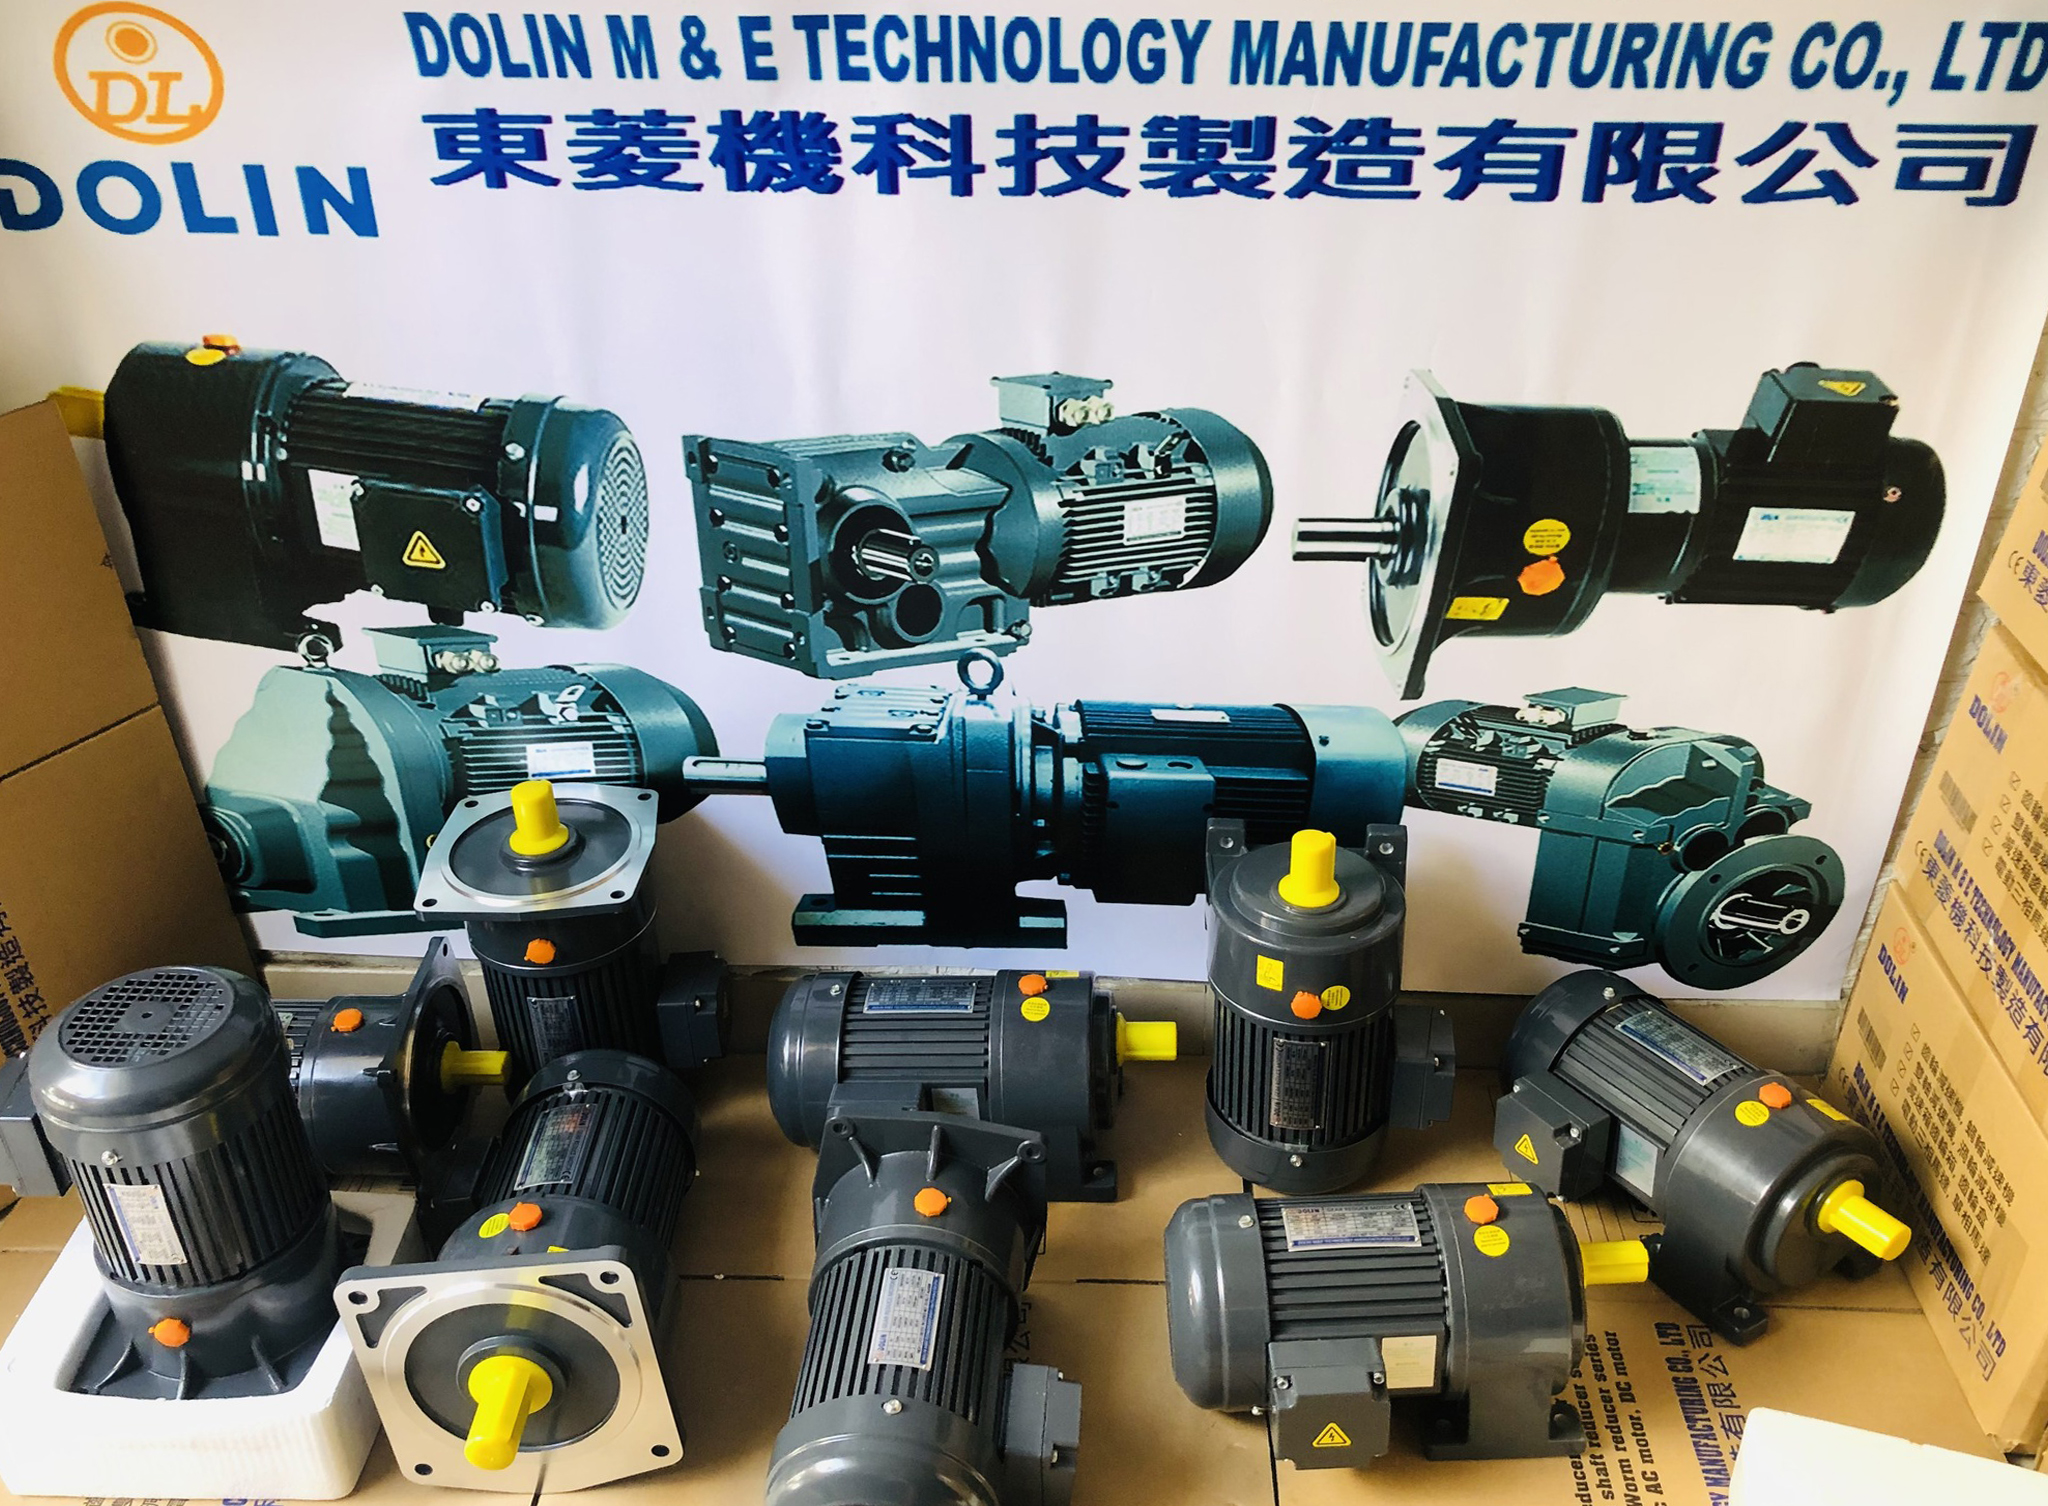 Dolin moves motor manufacturing from Taiwan to Vietnam